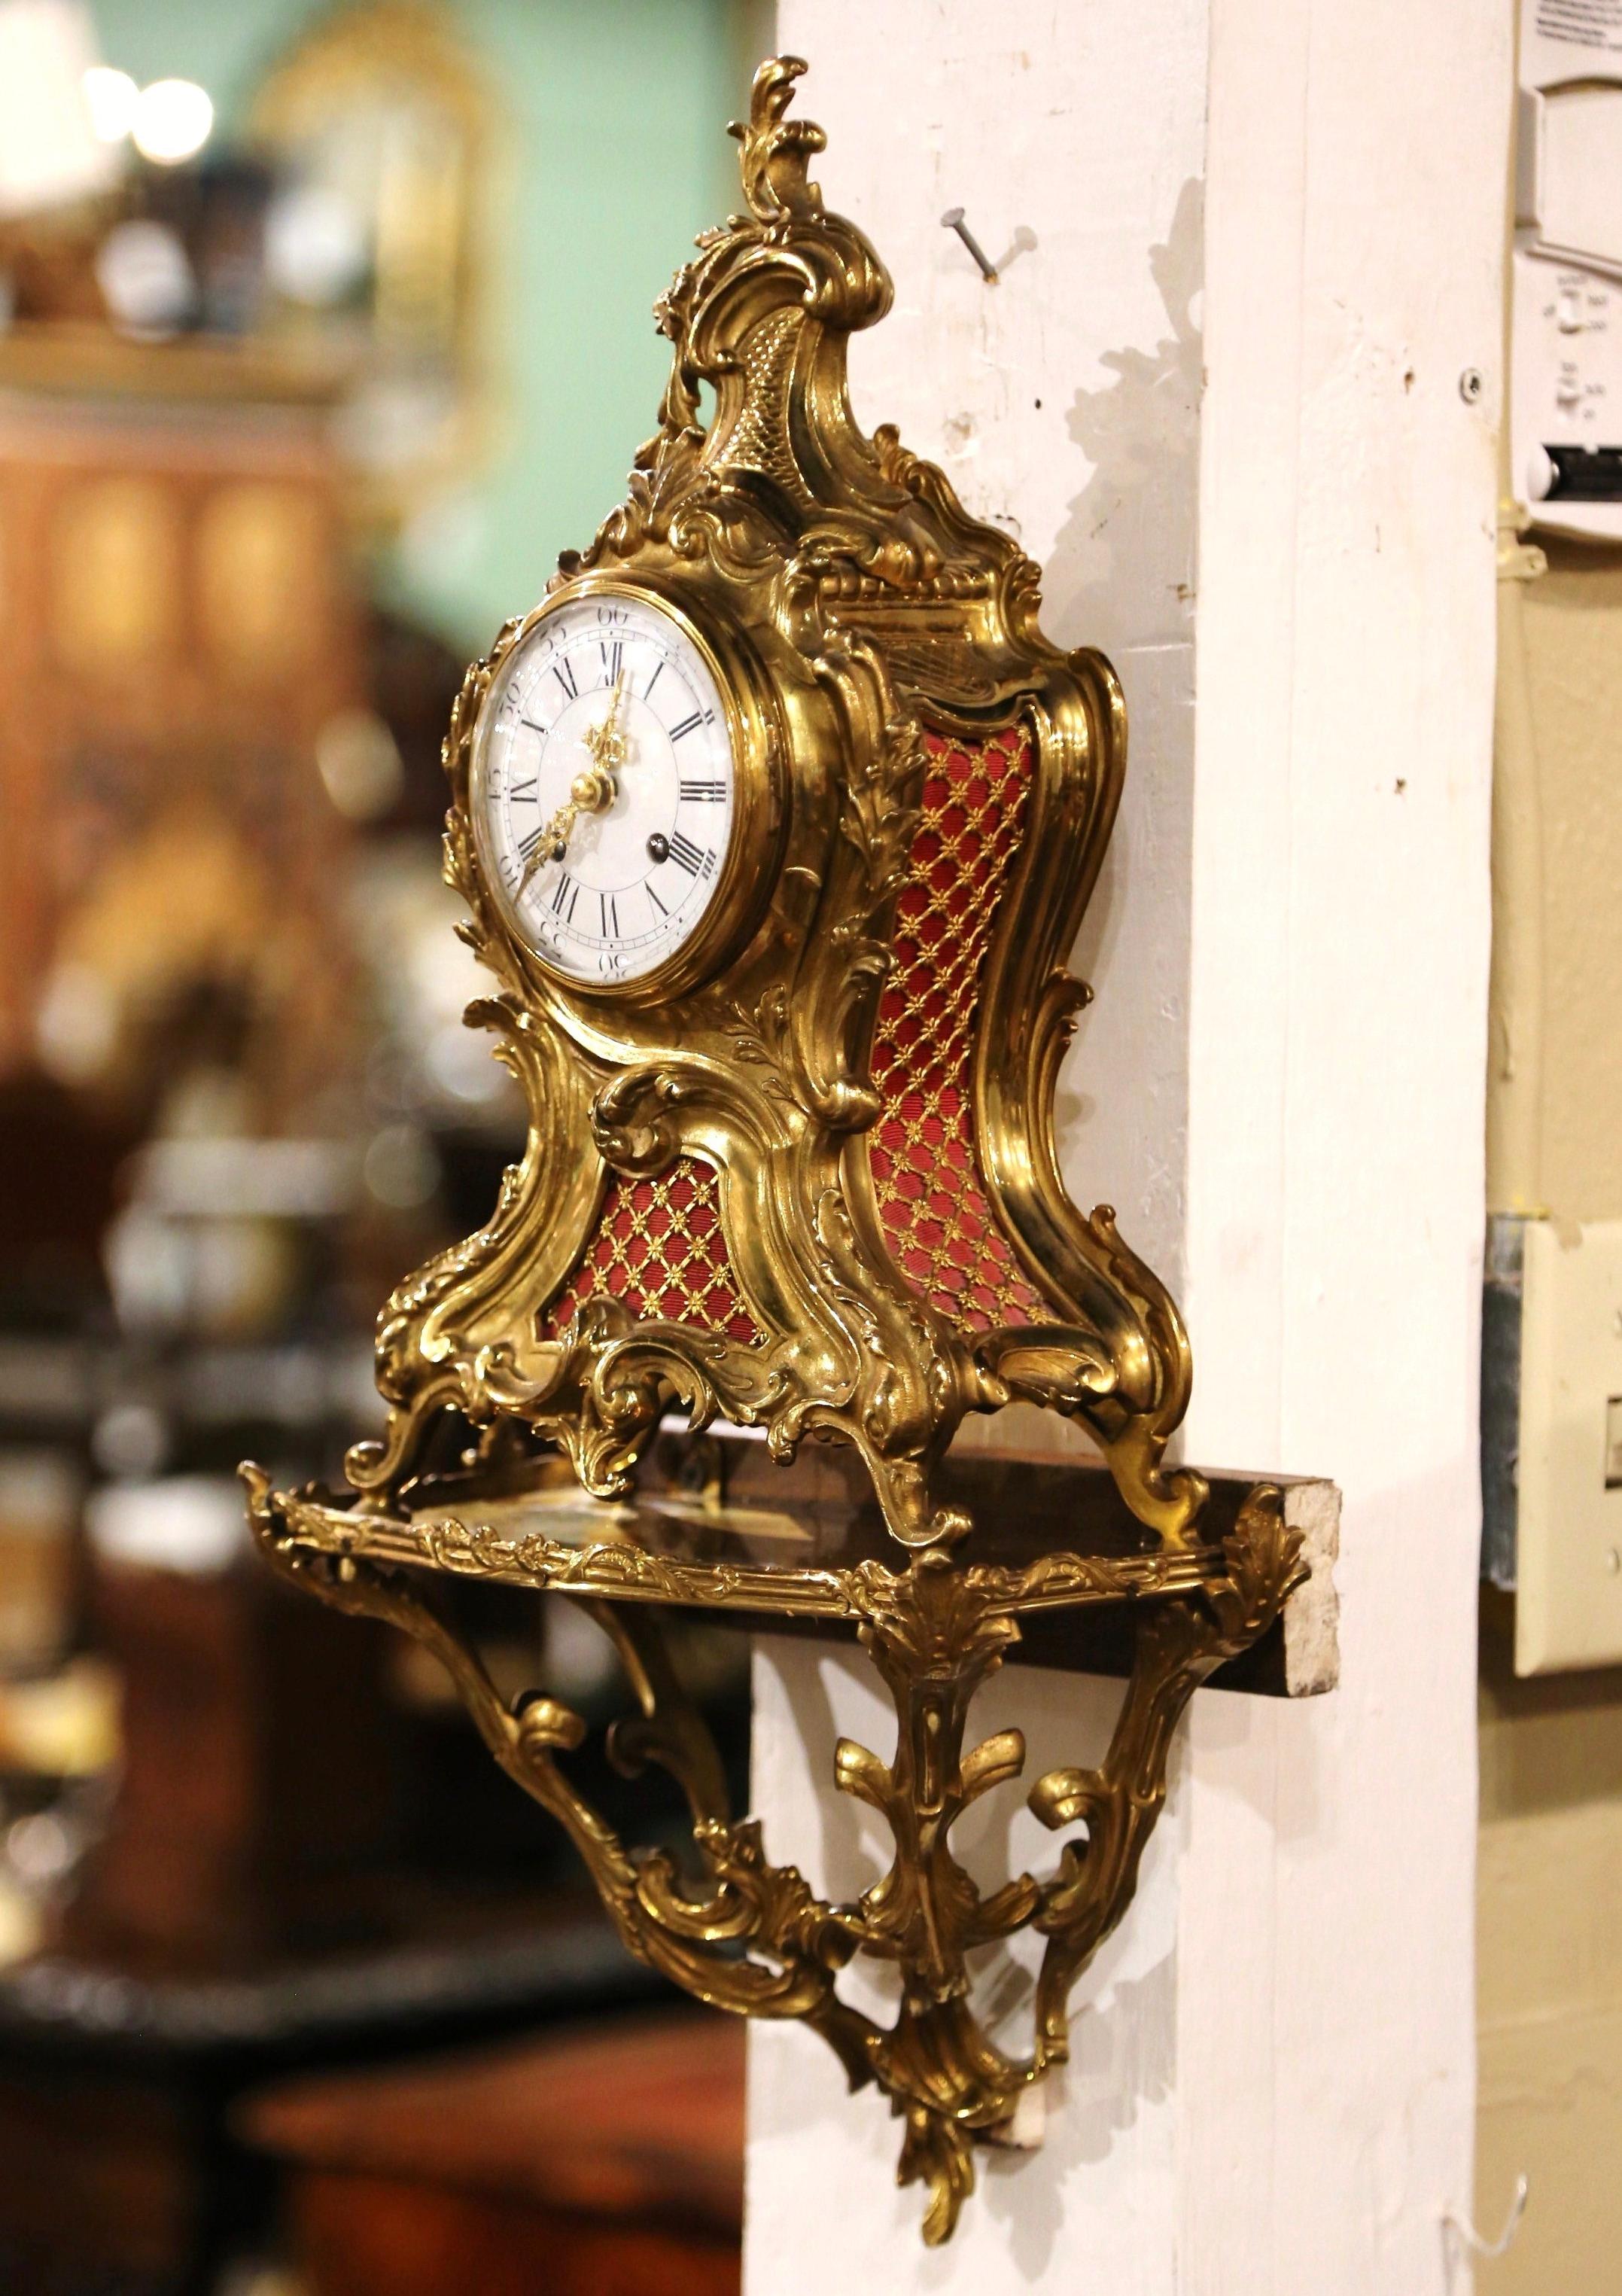 Crafted in Paris, France circa 1860, the antique time keeper can be used as a mantel clock or placed on the original wall bracket; the clock and stand are decorated throughout with foliage, scroll and acanthus leaf motifs. The timepiece is in